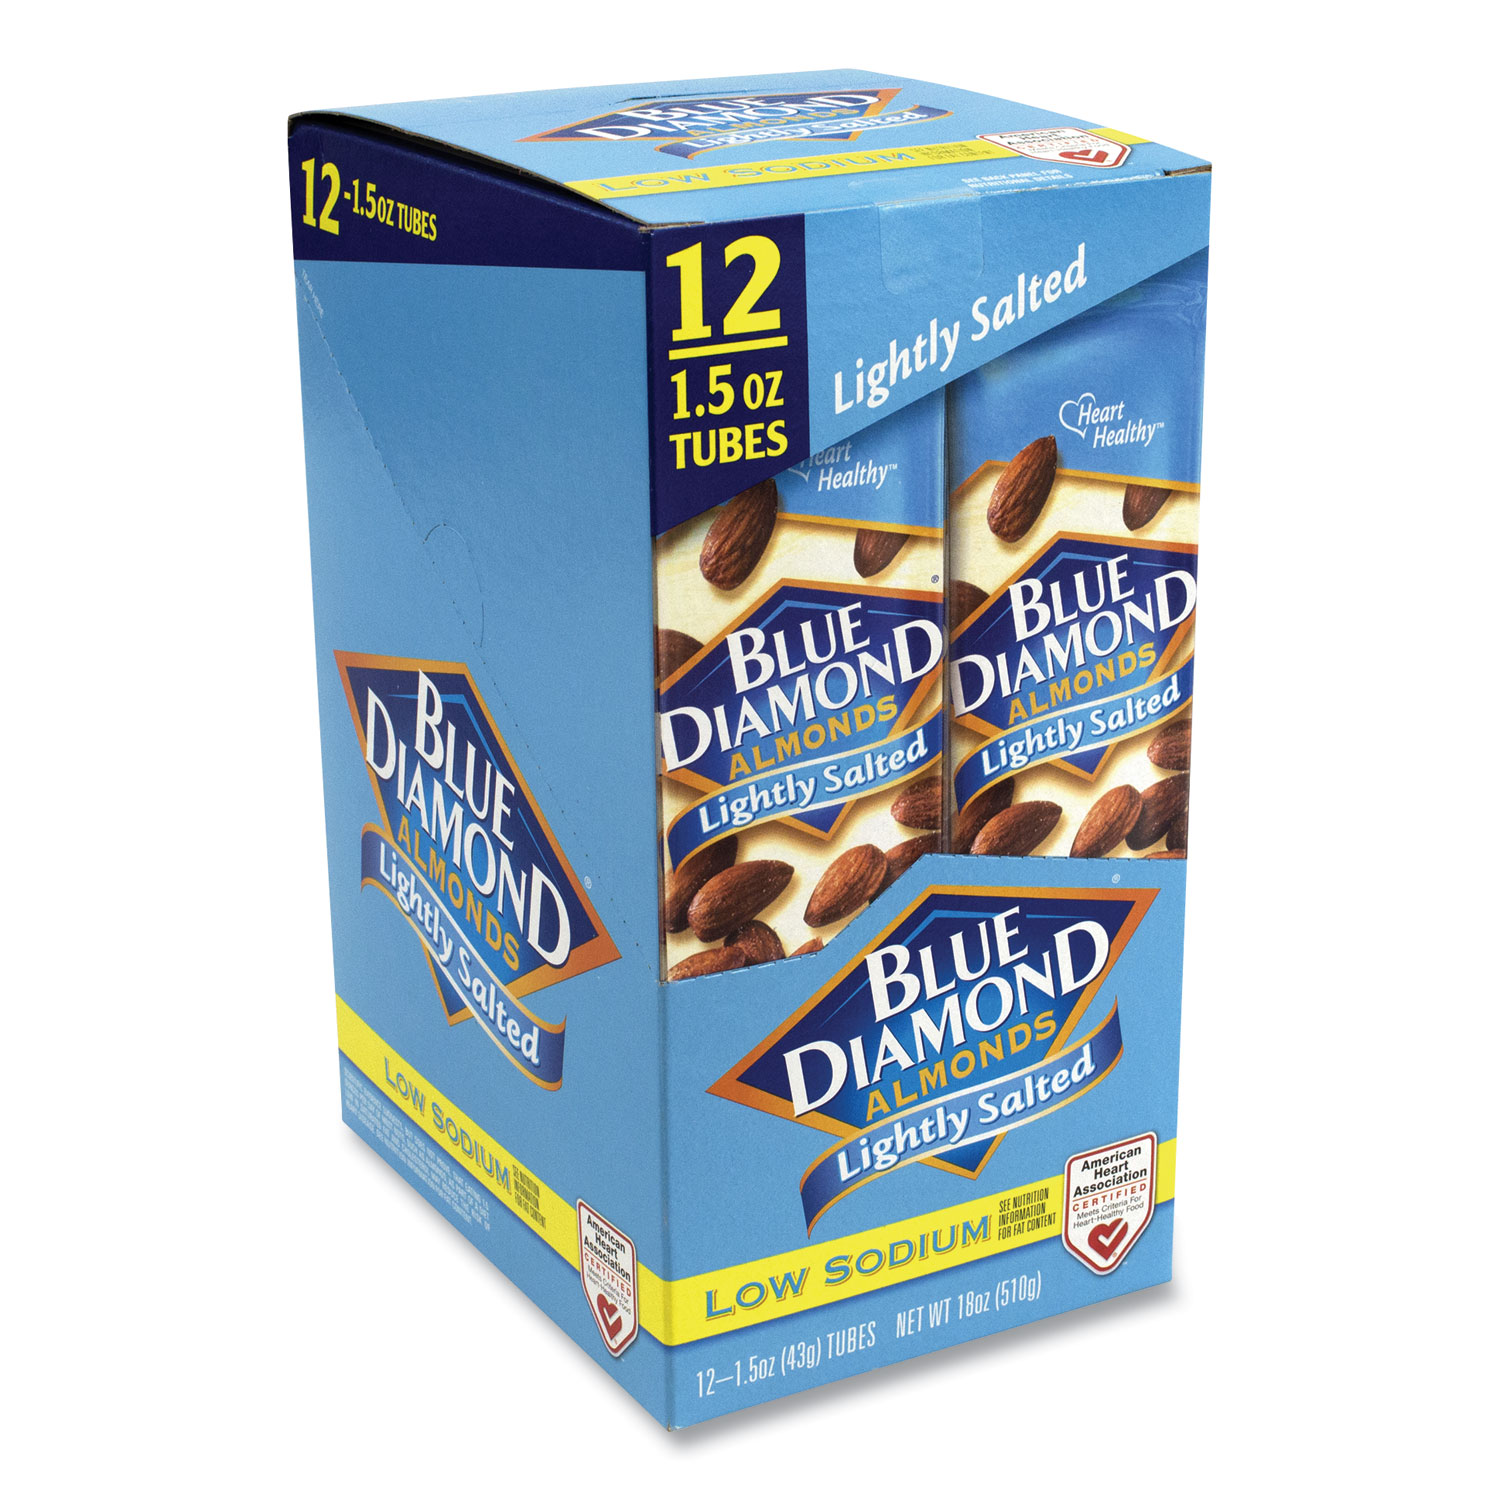 Blue Diamond® Low Sodium Lightly Salted Almonds, 1.5 oz Tube, 12 Tubes/Box, Free Delivery in 1-4 Business Days